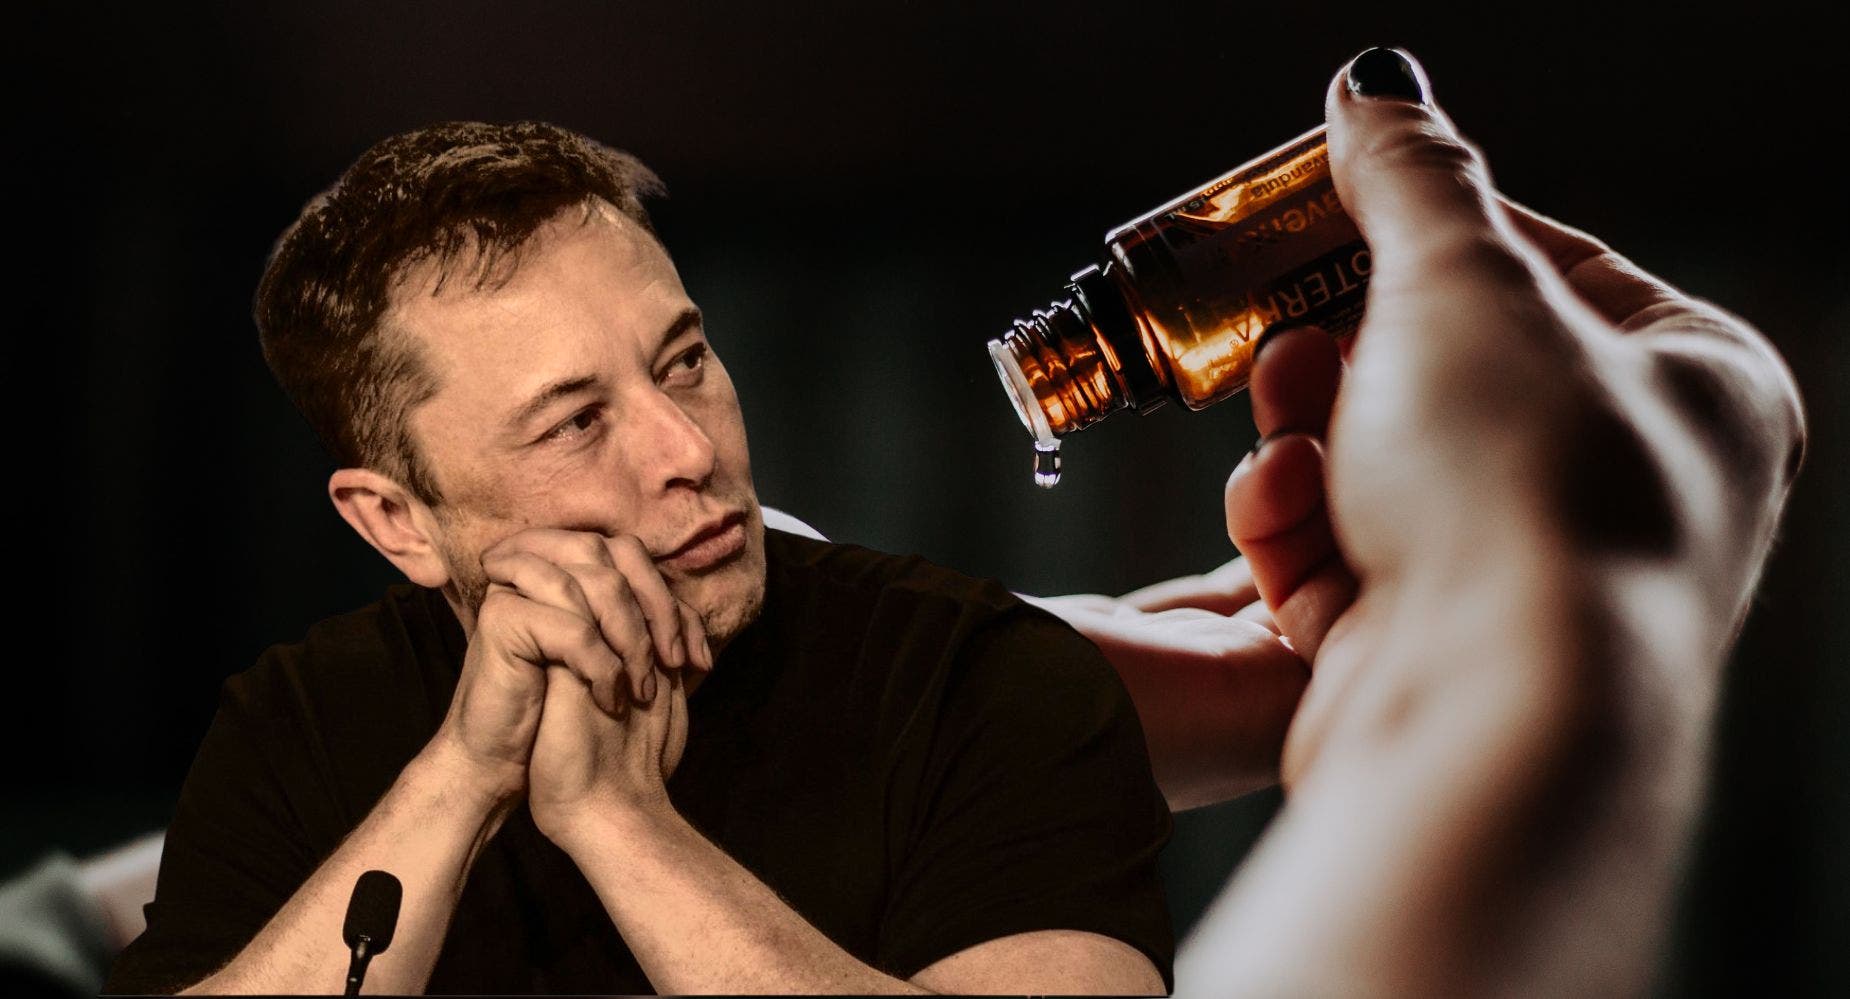 Elon Musk Has An Idea For A New Cologne, But You May Want To Think Twice Before Using It